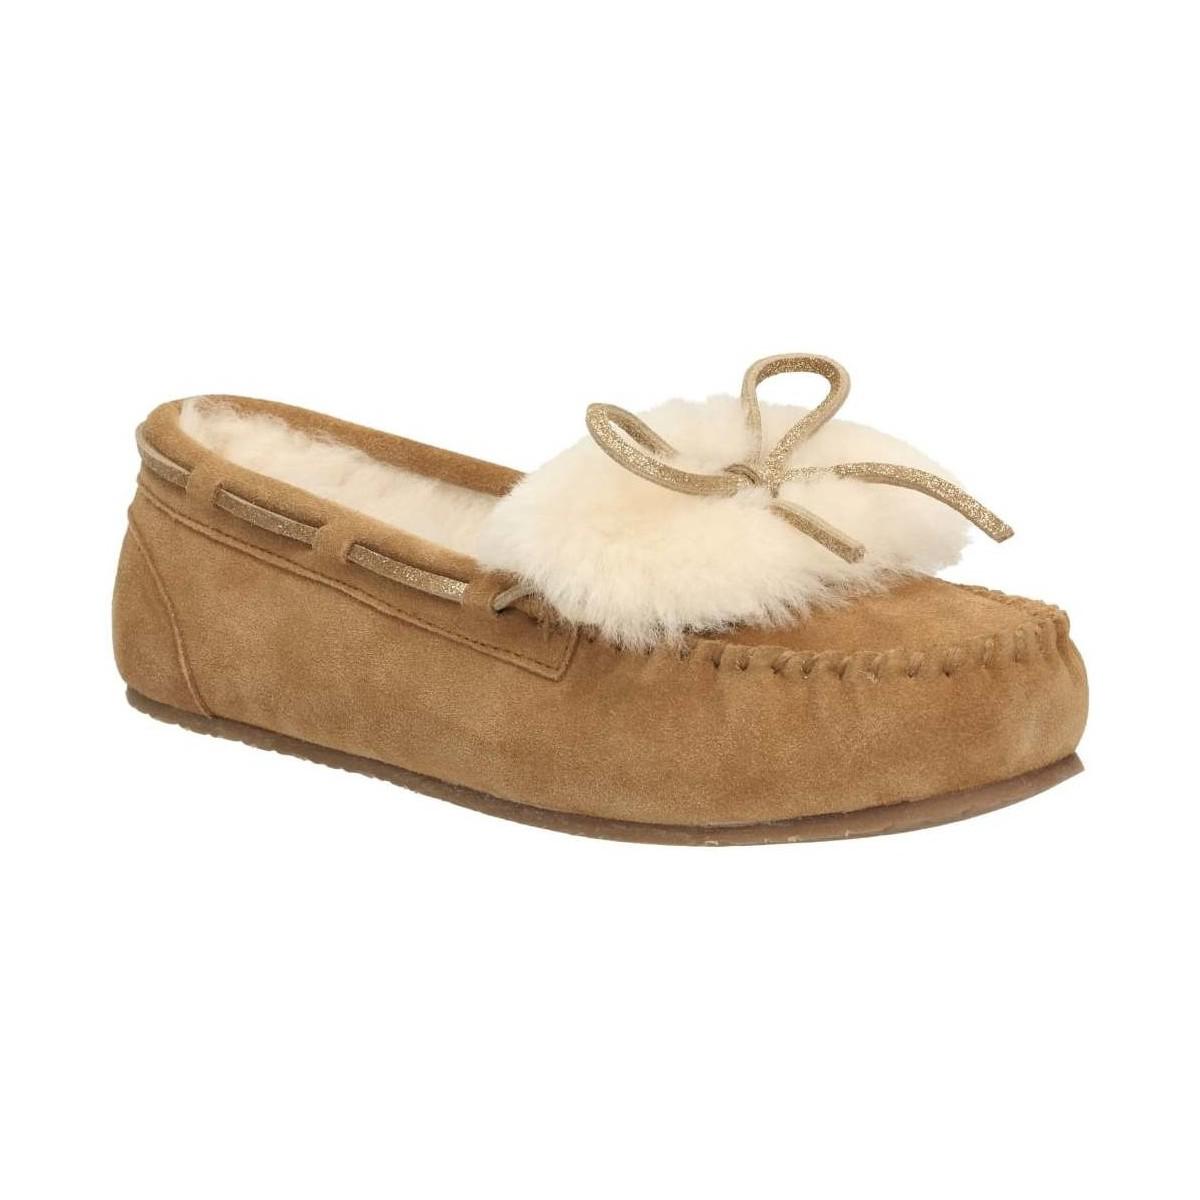 LADIES CLARKS FUR LINED MOCCASIN SLIPPERS WARM GLAMOUR